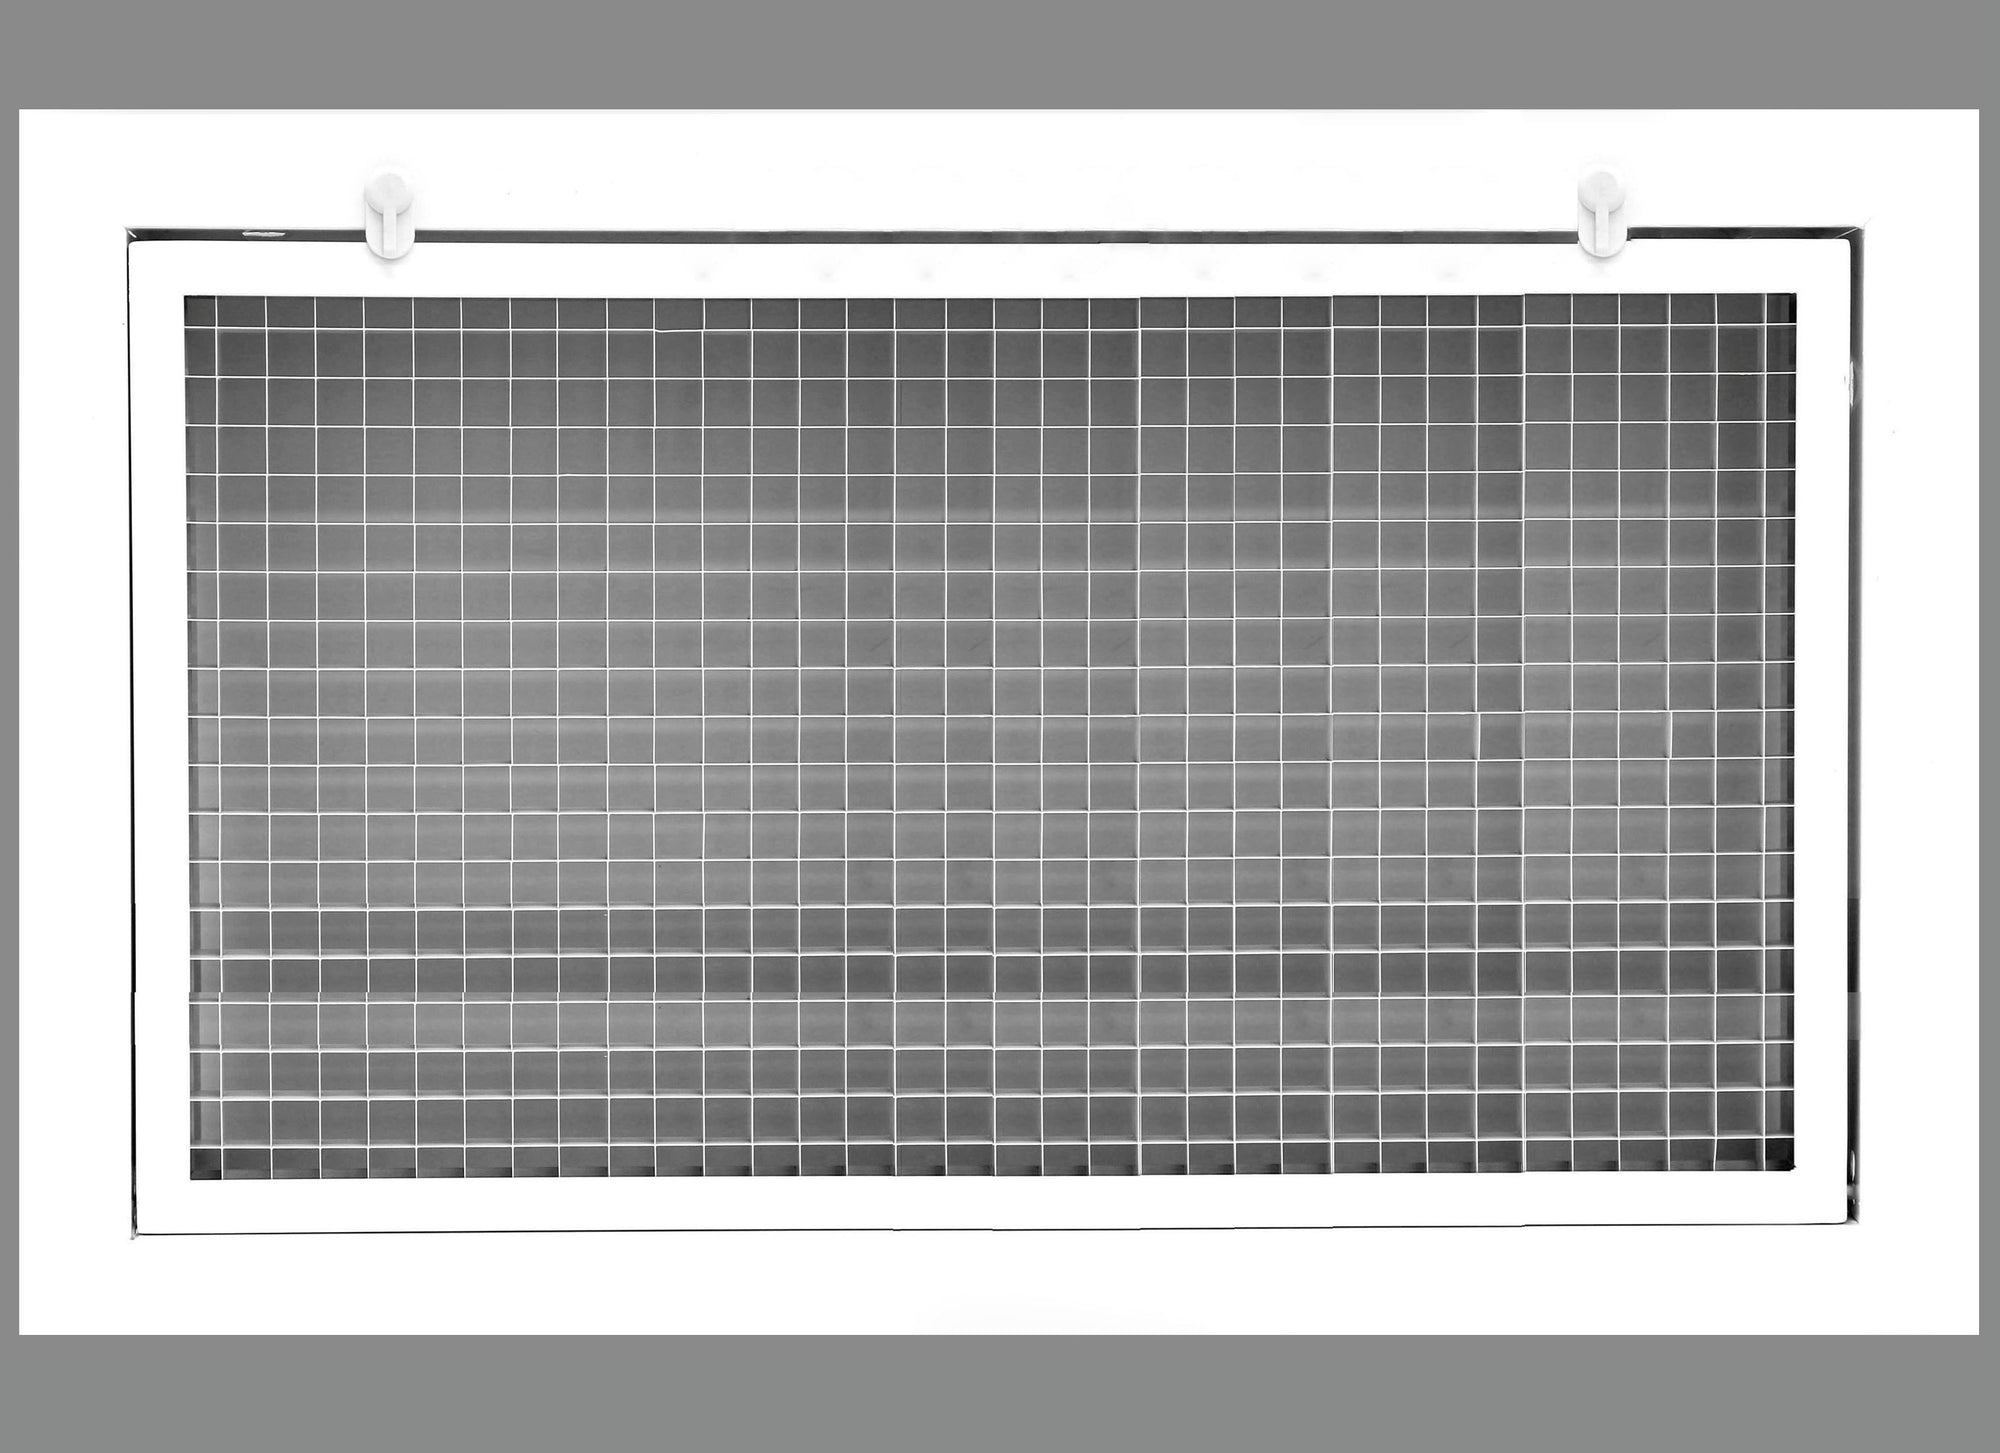 20" x 8" Cube Core Eggcrate Return Air Filter Grille for 1" Filter